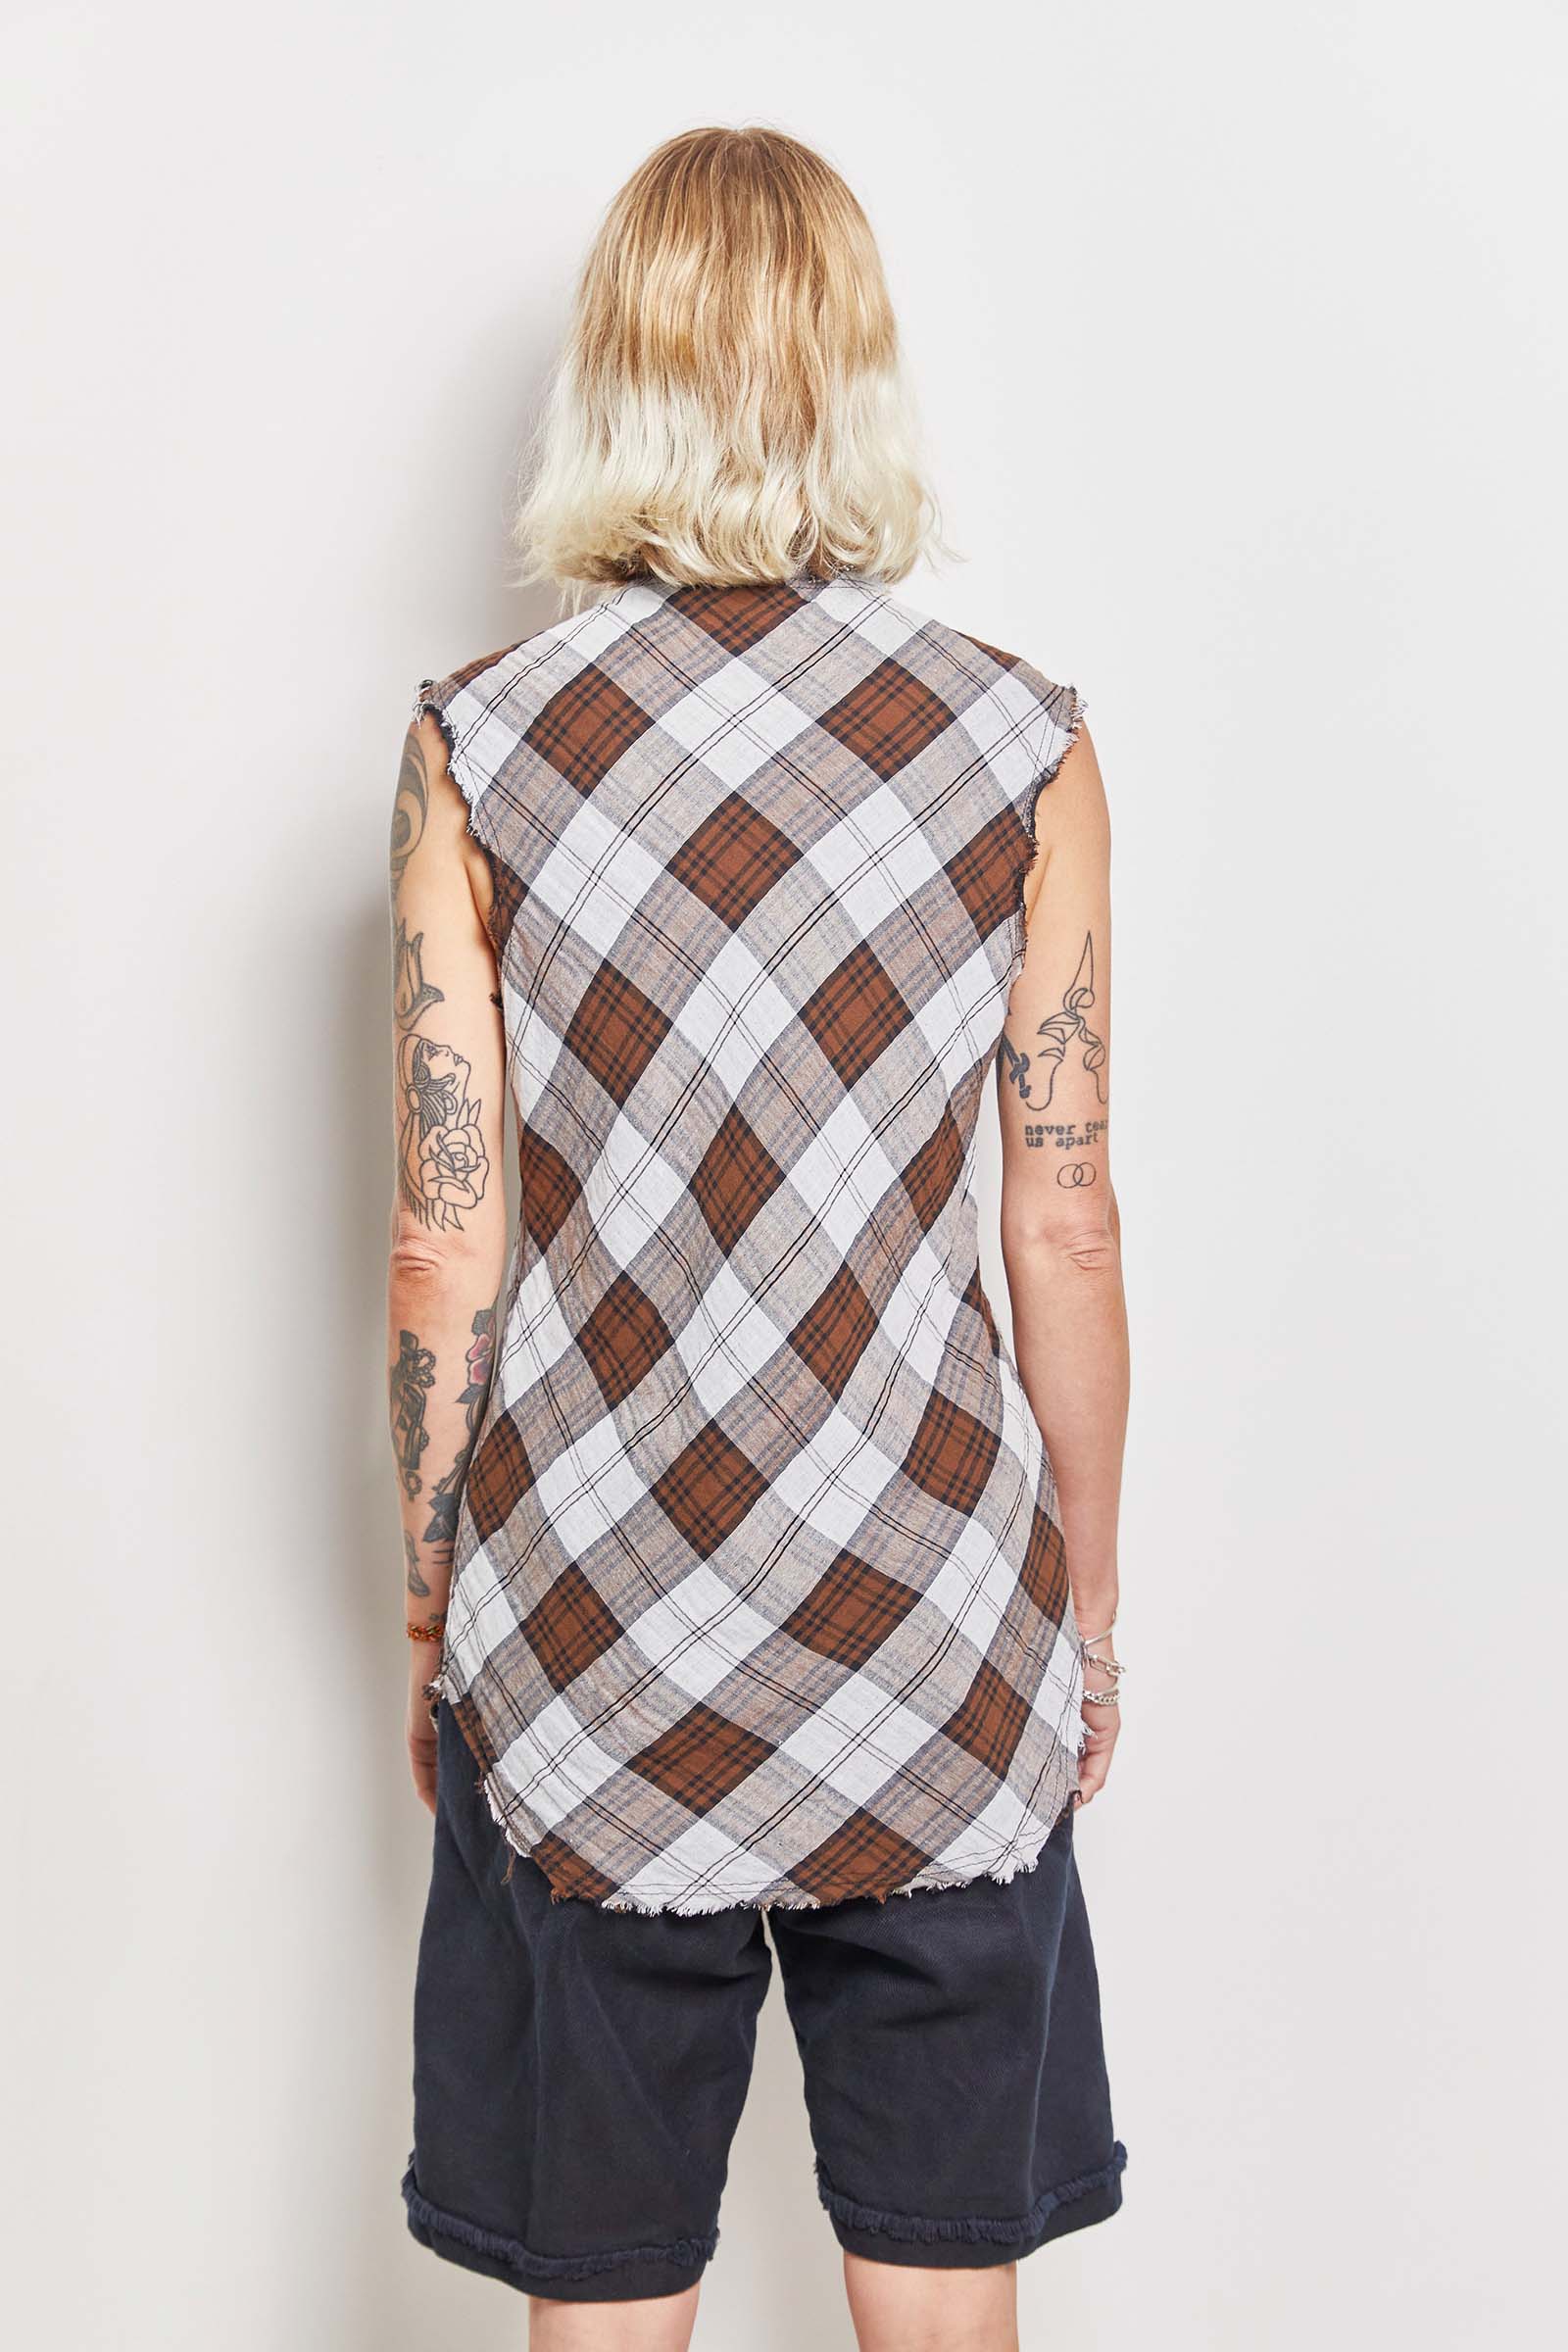 byfreer rusty chocolate check top.